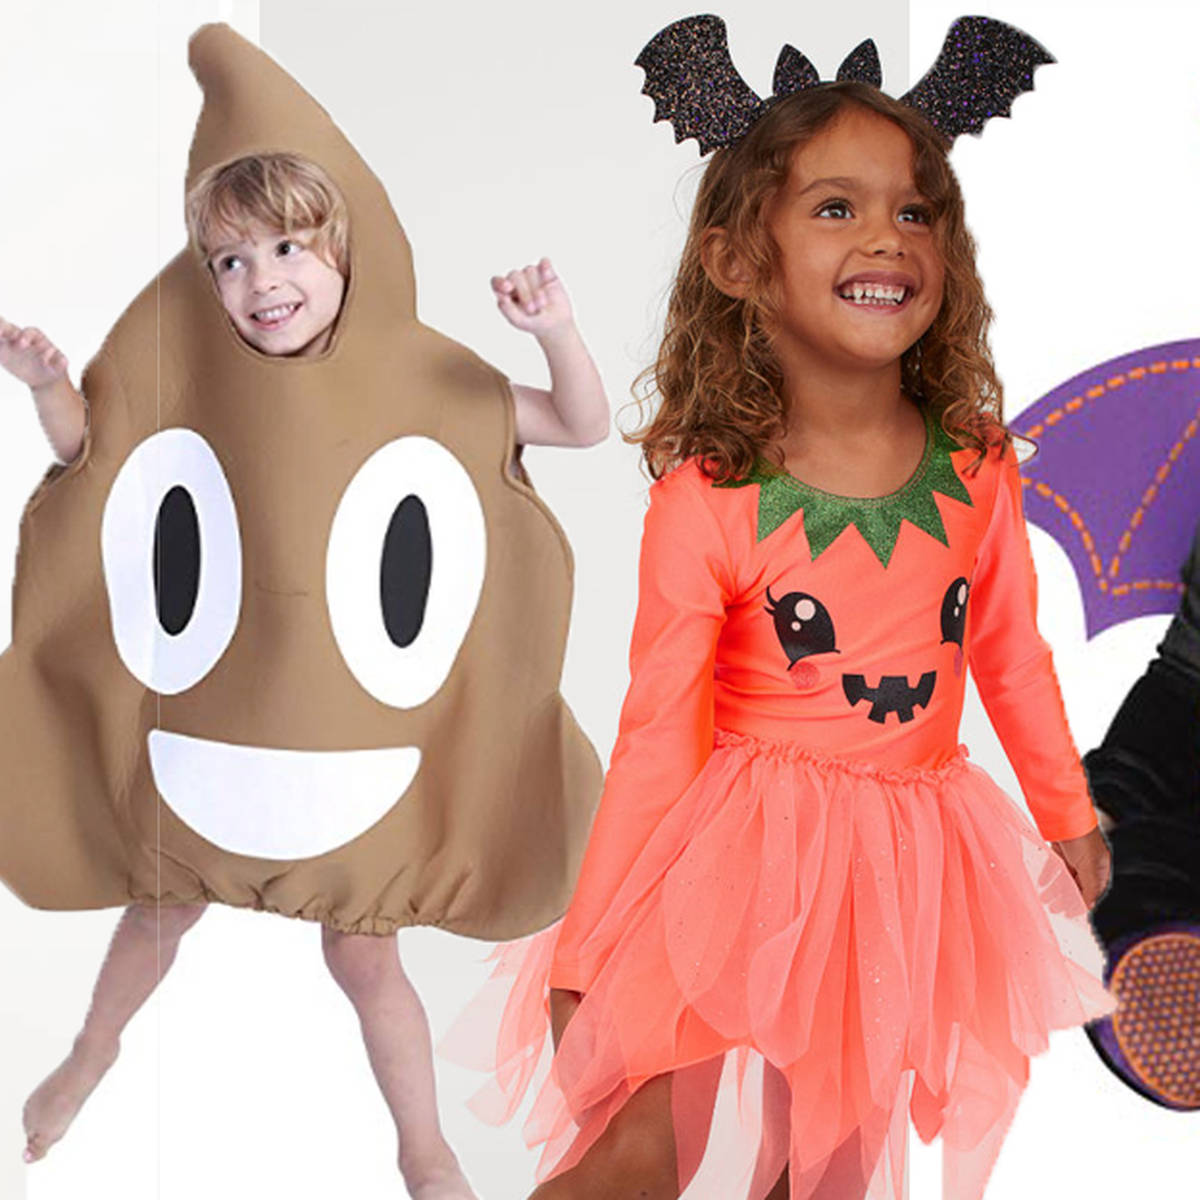 The best Halloween costume ideas for kids in 2019 - from cartoon characters  to creepy... - Heart